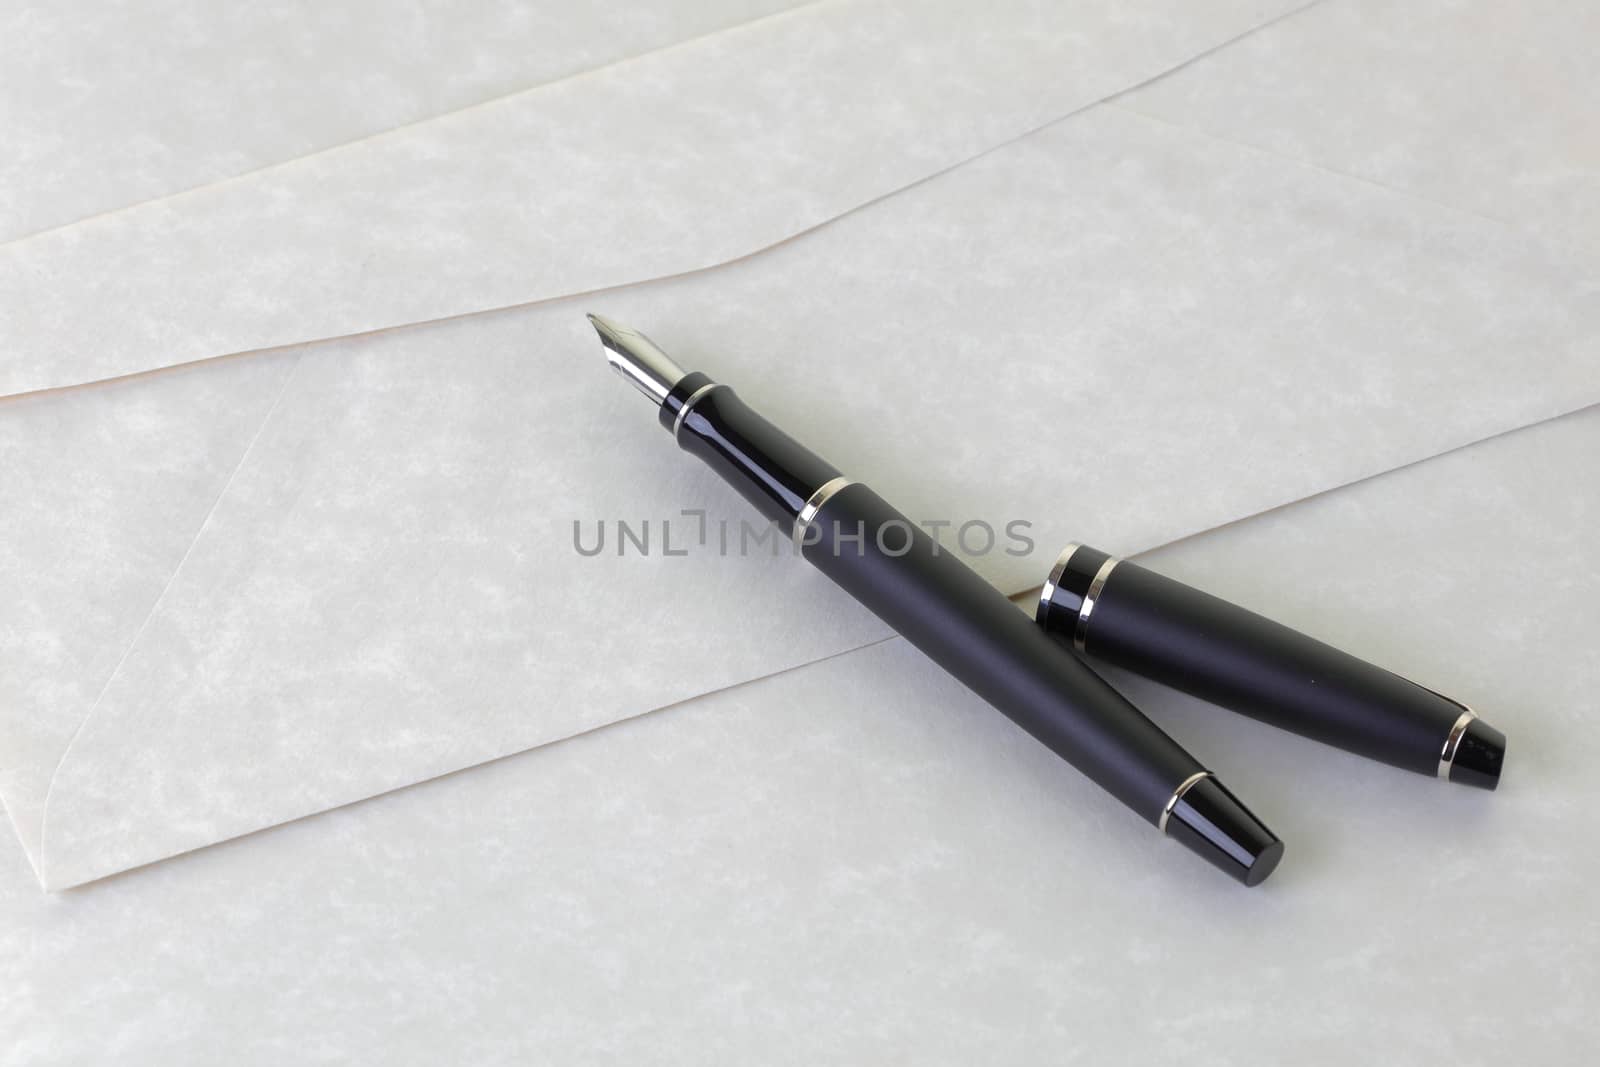 A pen letter and writing paper with envelope